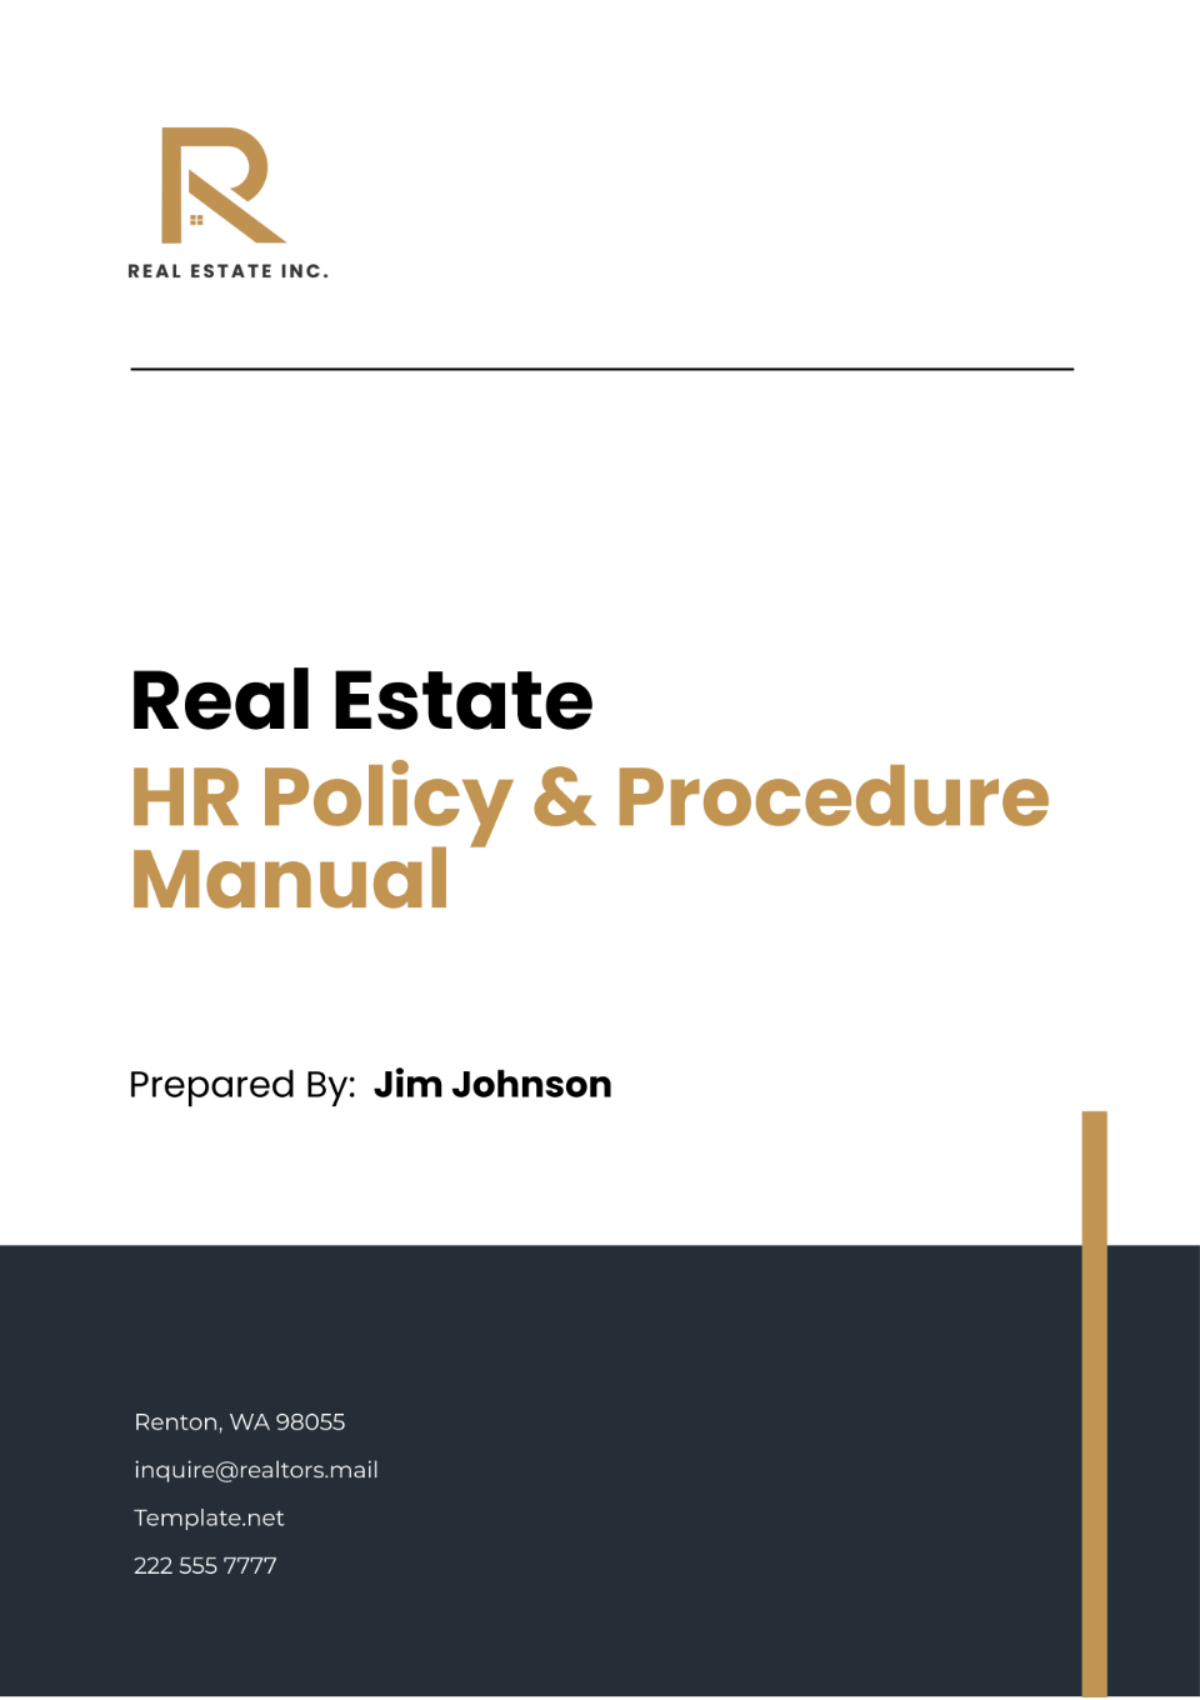 Real Estate HR Policy & Procedure Manual Template